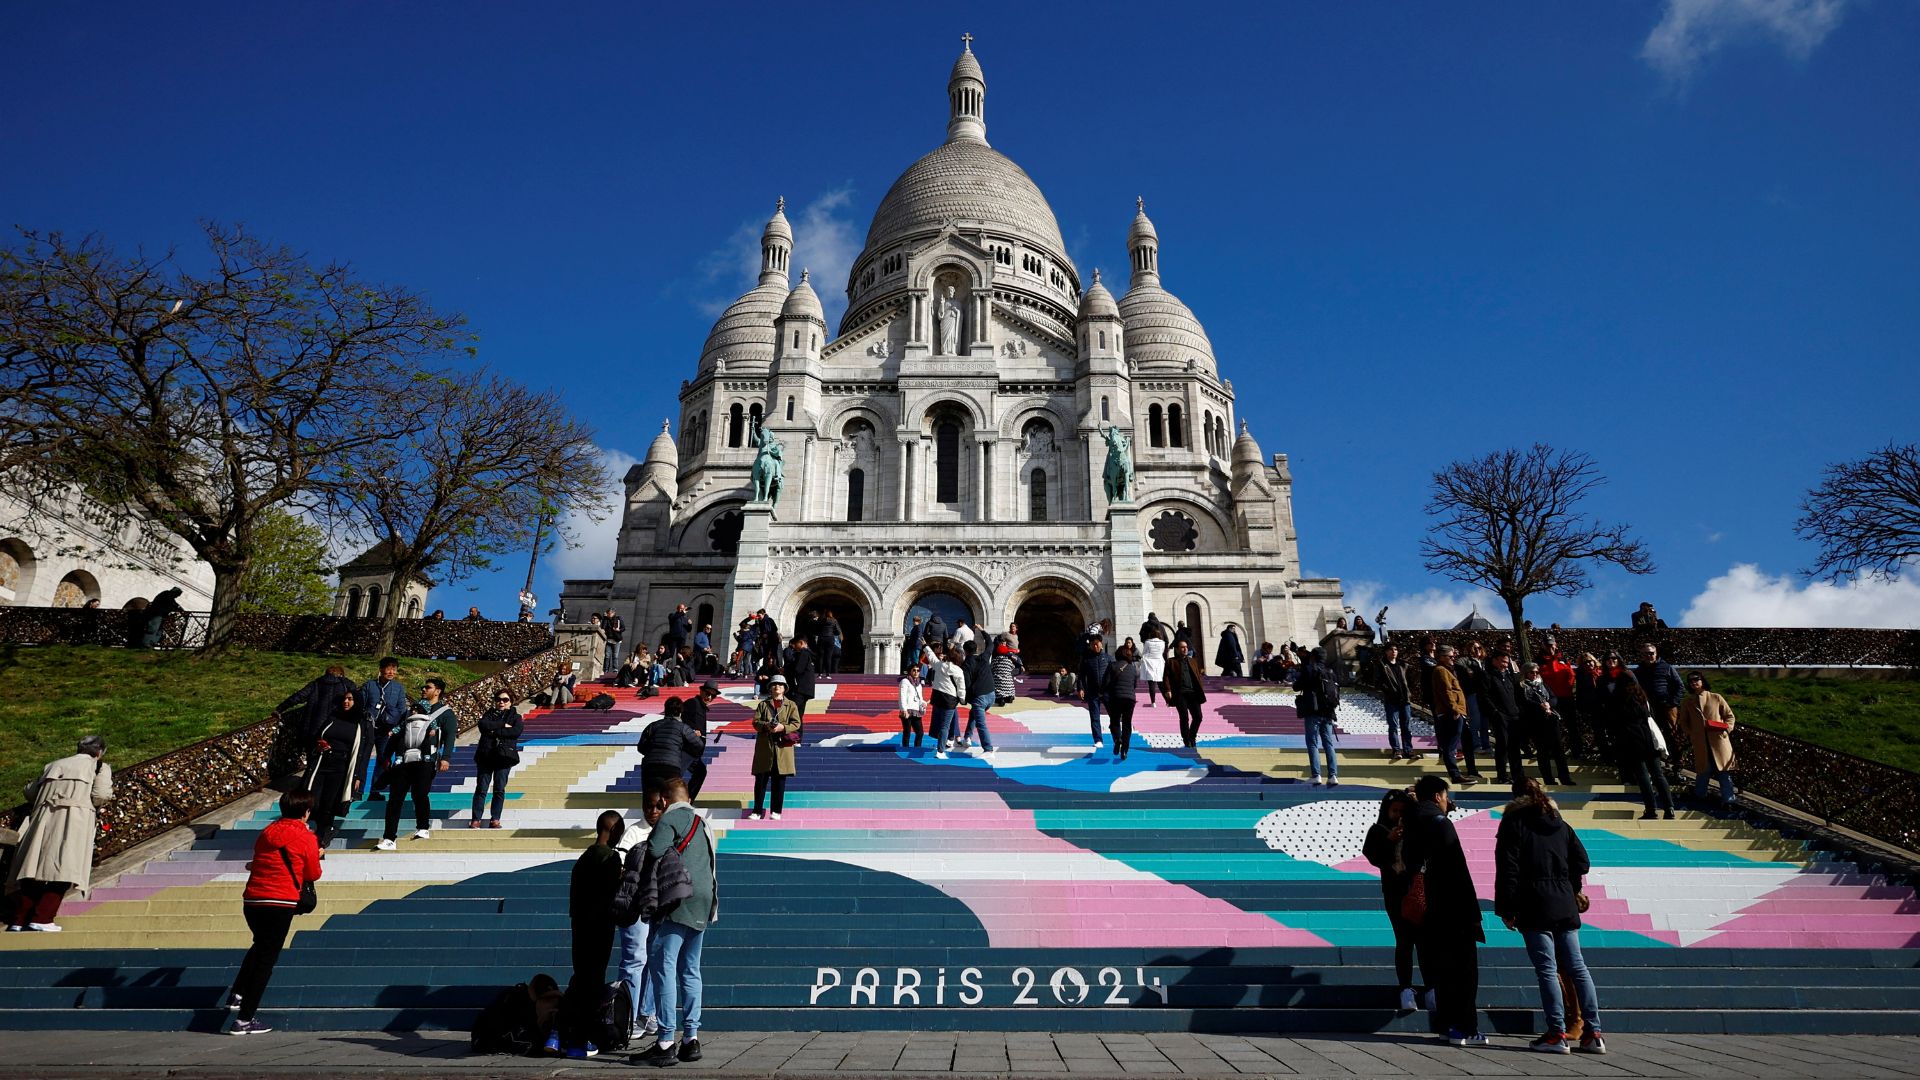 Tourists stand on the Sacre-Coeur Basilica stairs painted with the Paris 2024 Olympic and Paralympic Games design. /Sarah Meyssonnier/Reuters